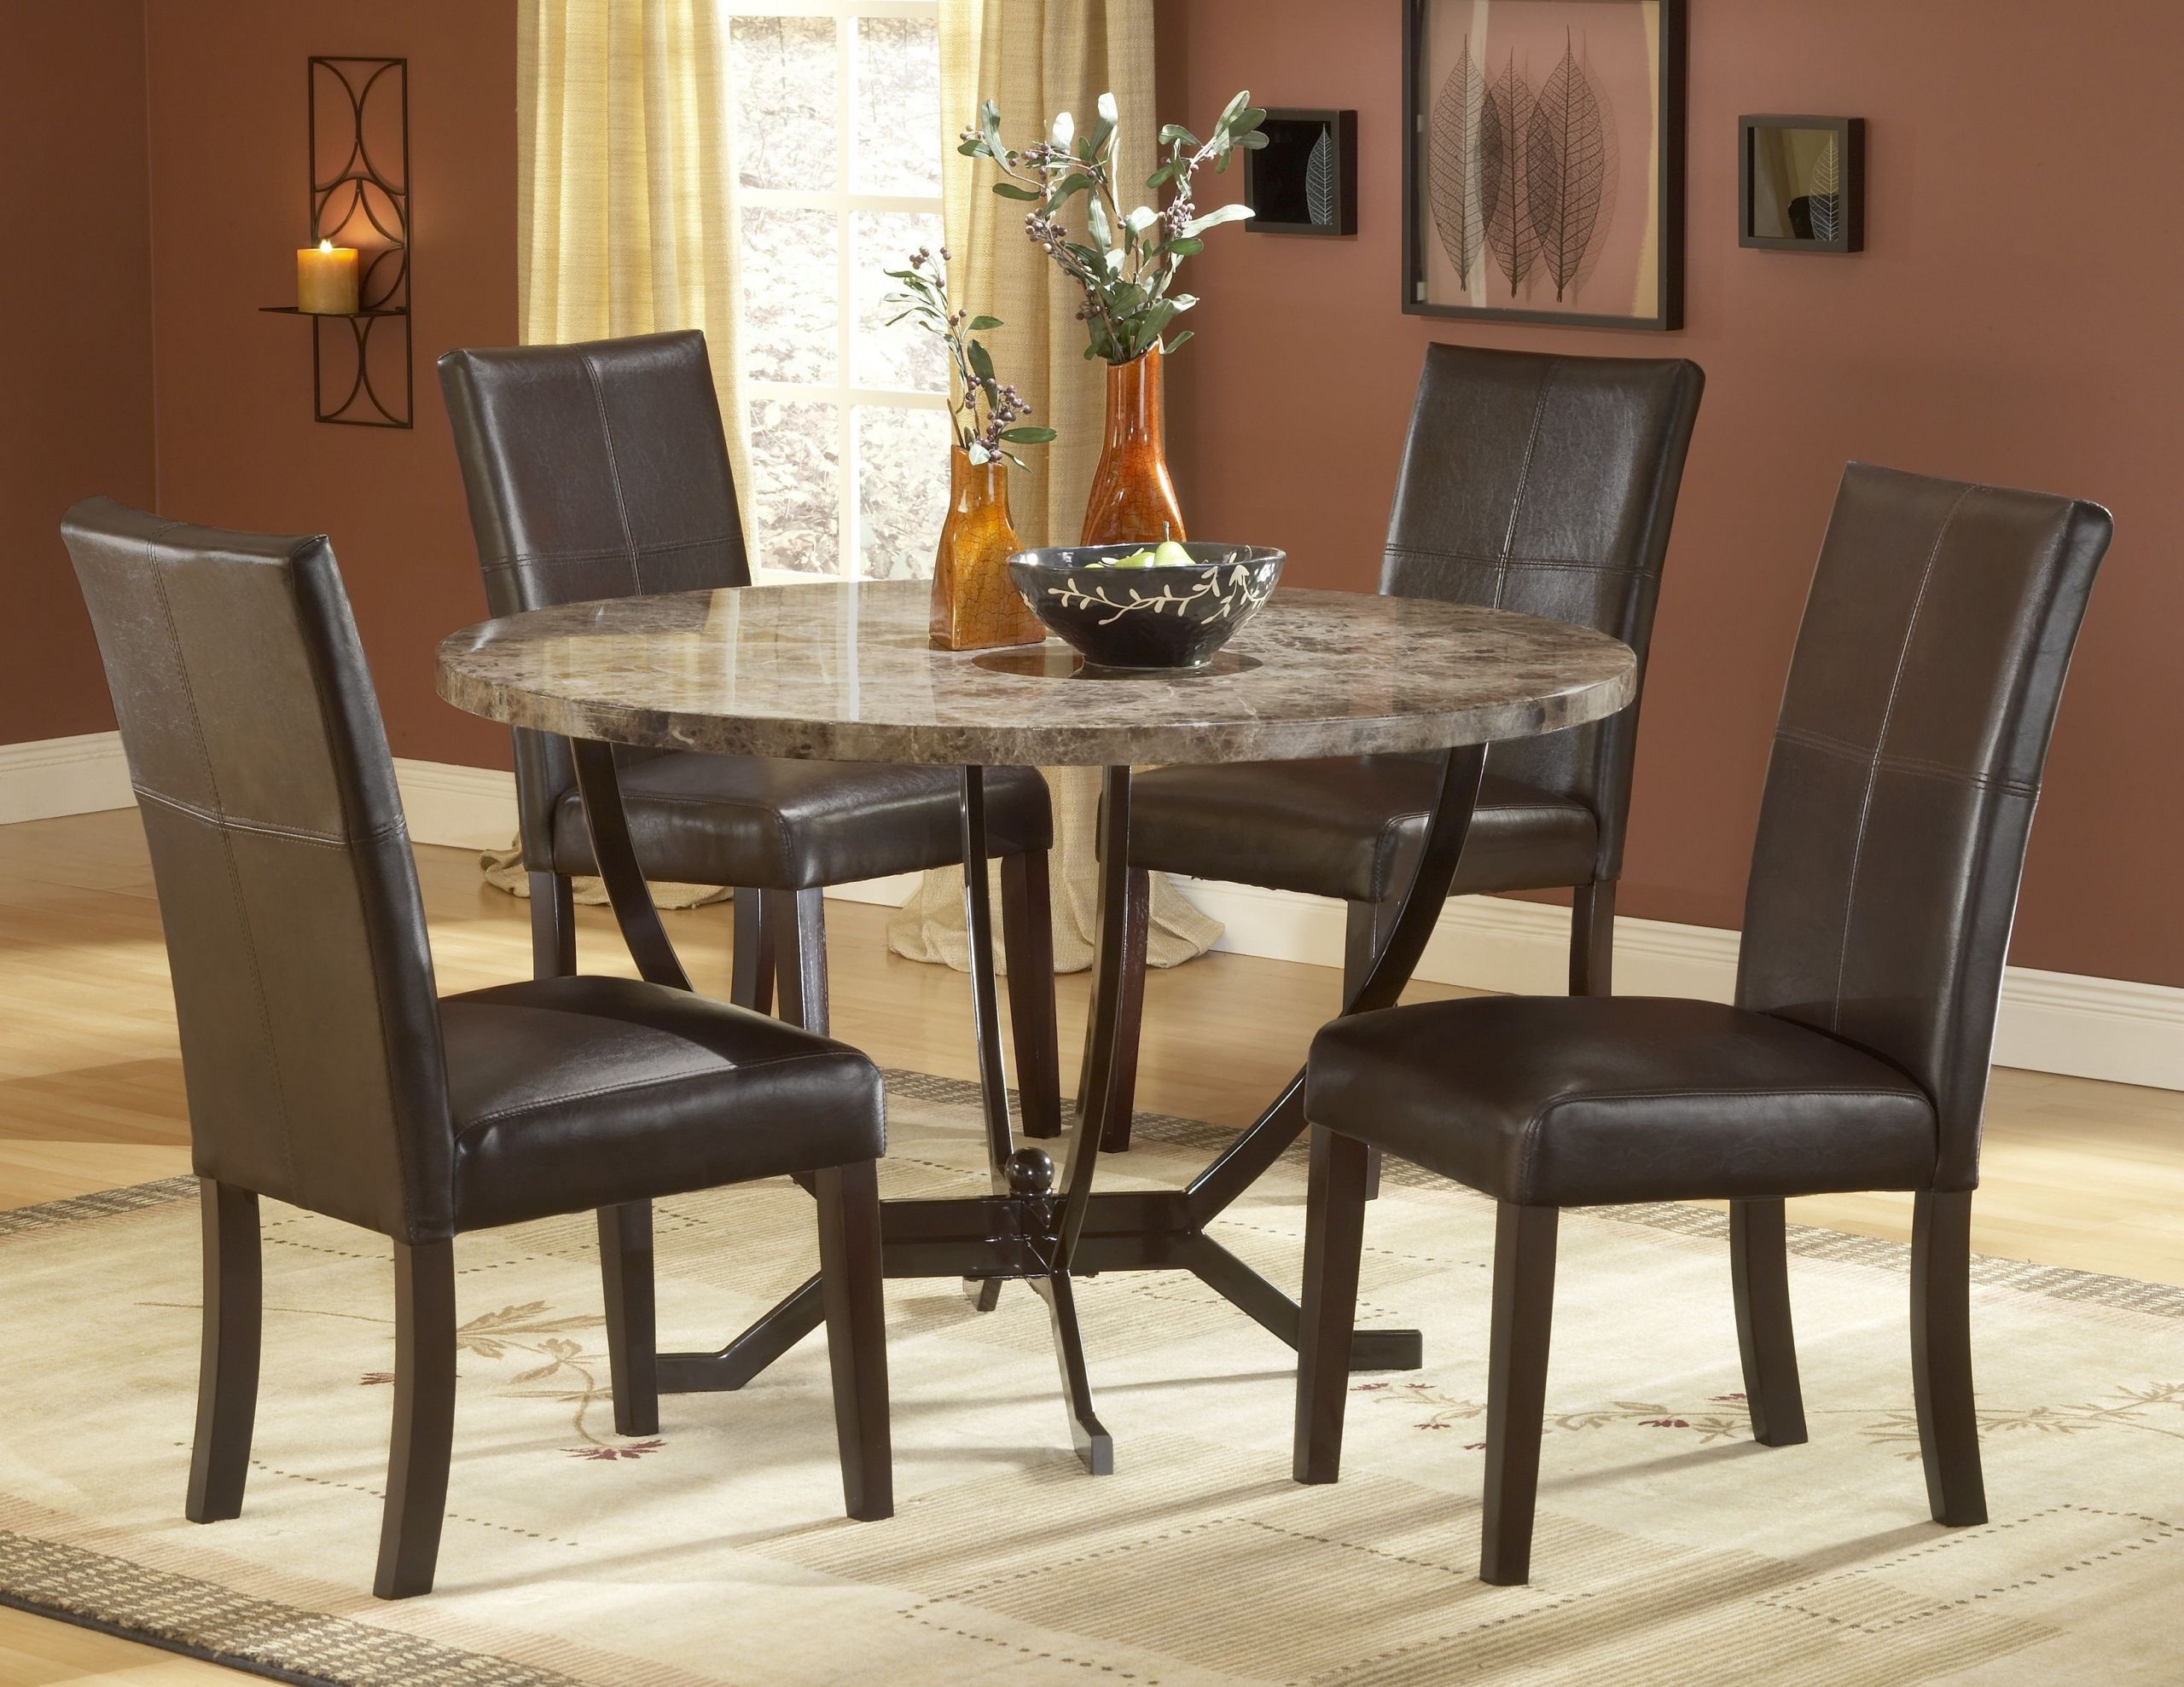 Small Kitchen Tables Sets
 Kitchen Table For Small Spaces Dinette Sets For Small